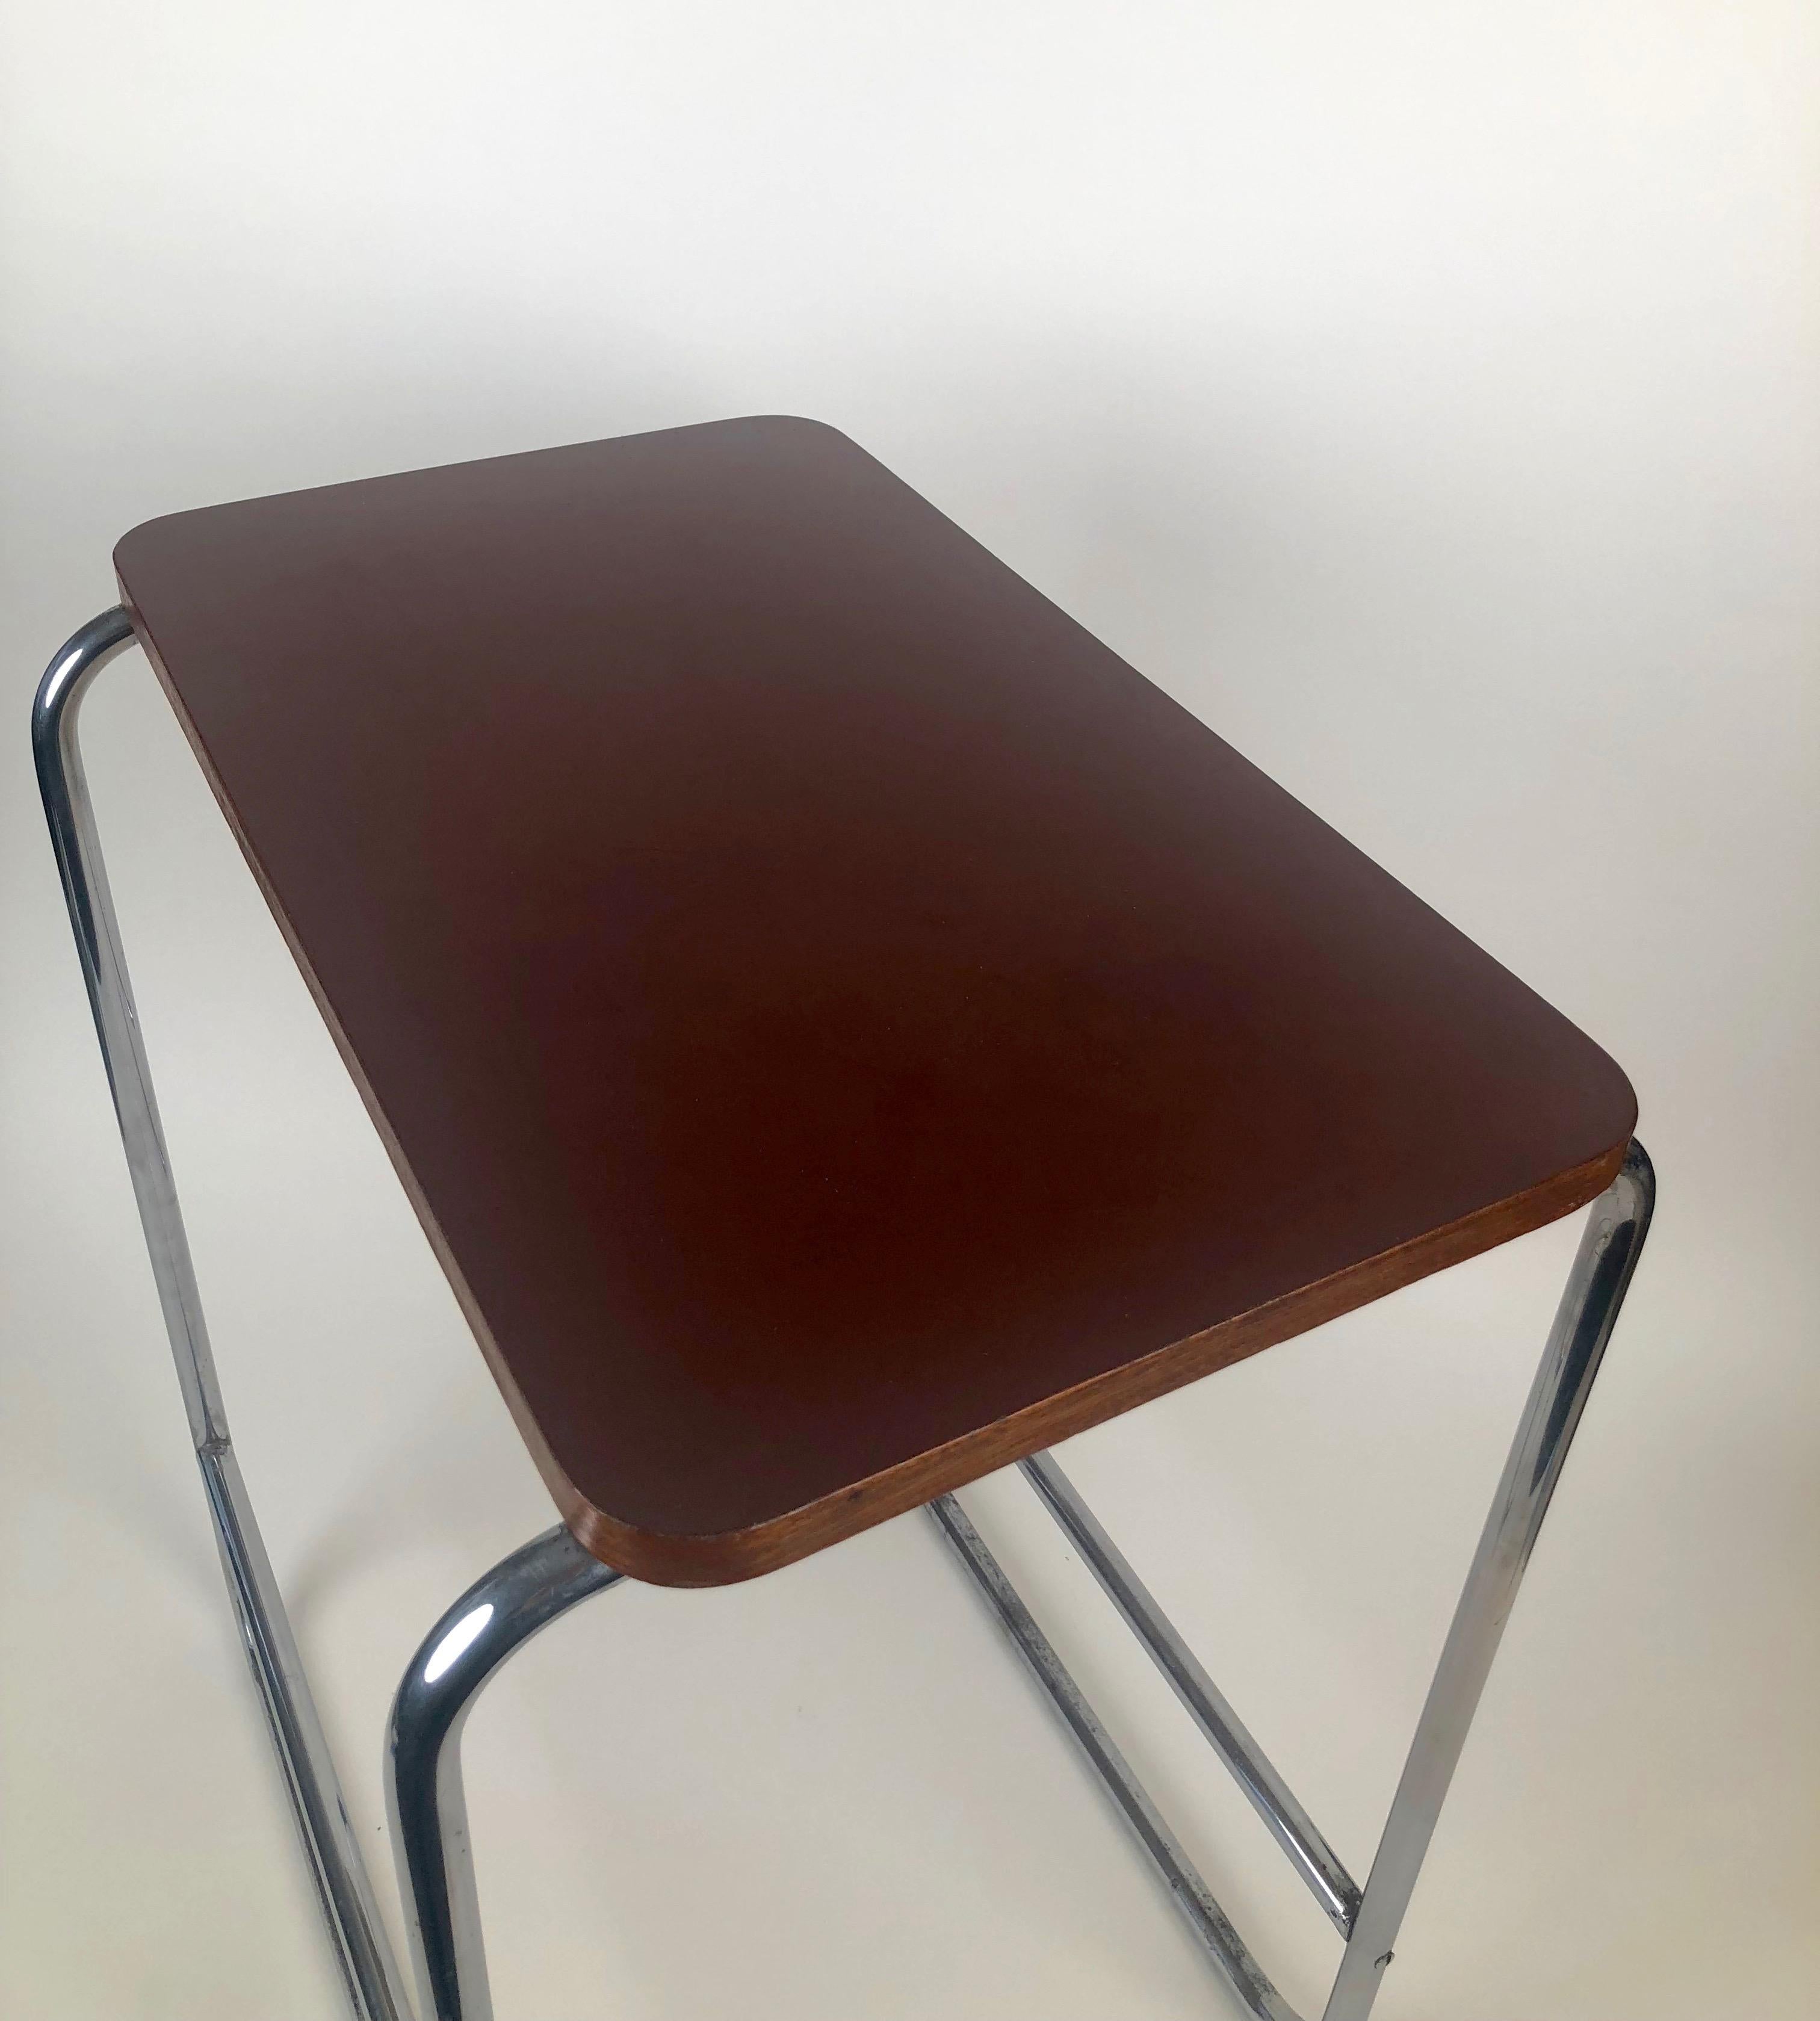 Steel Bauhaus Table with Bakelite Tabletop, from the 1930s, Czech Republic For Sale